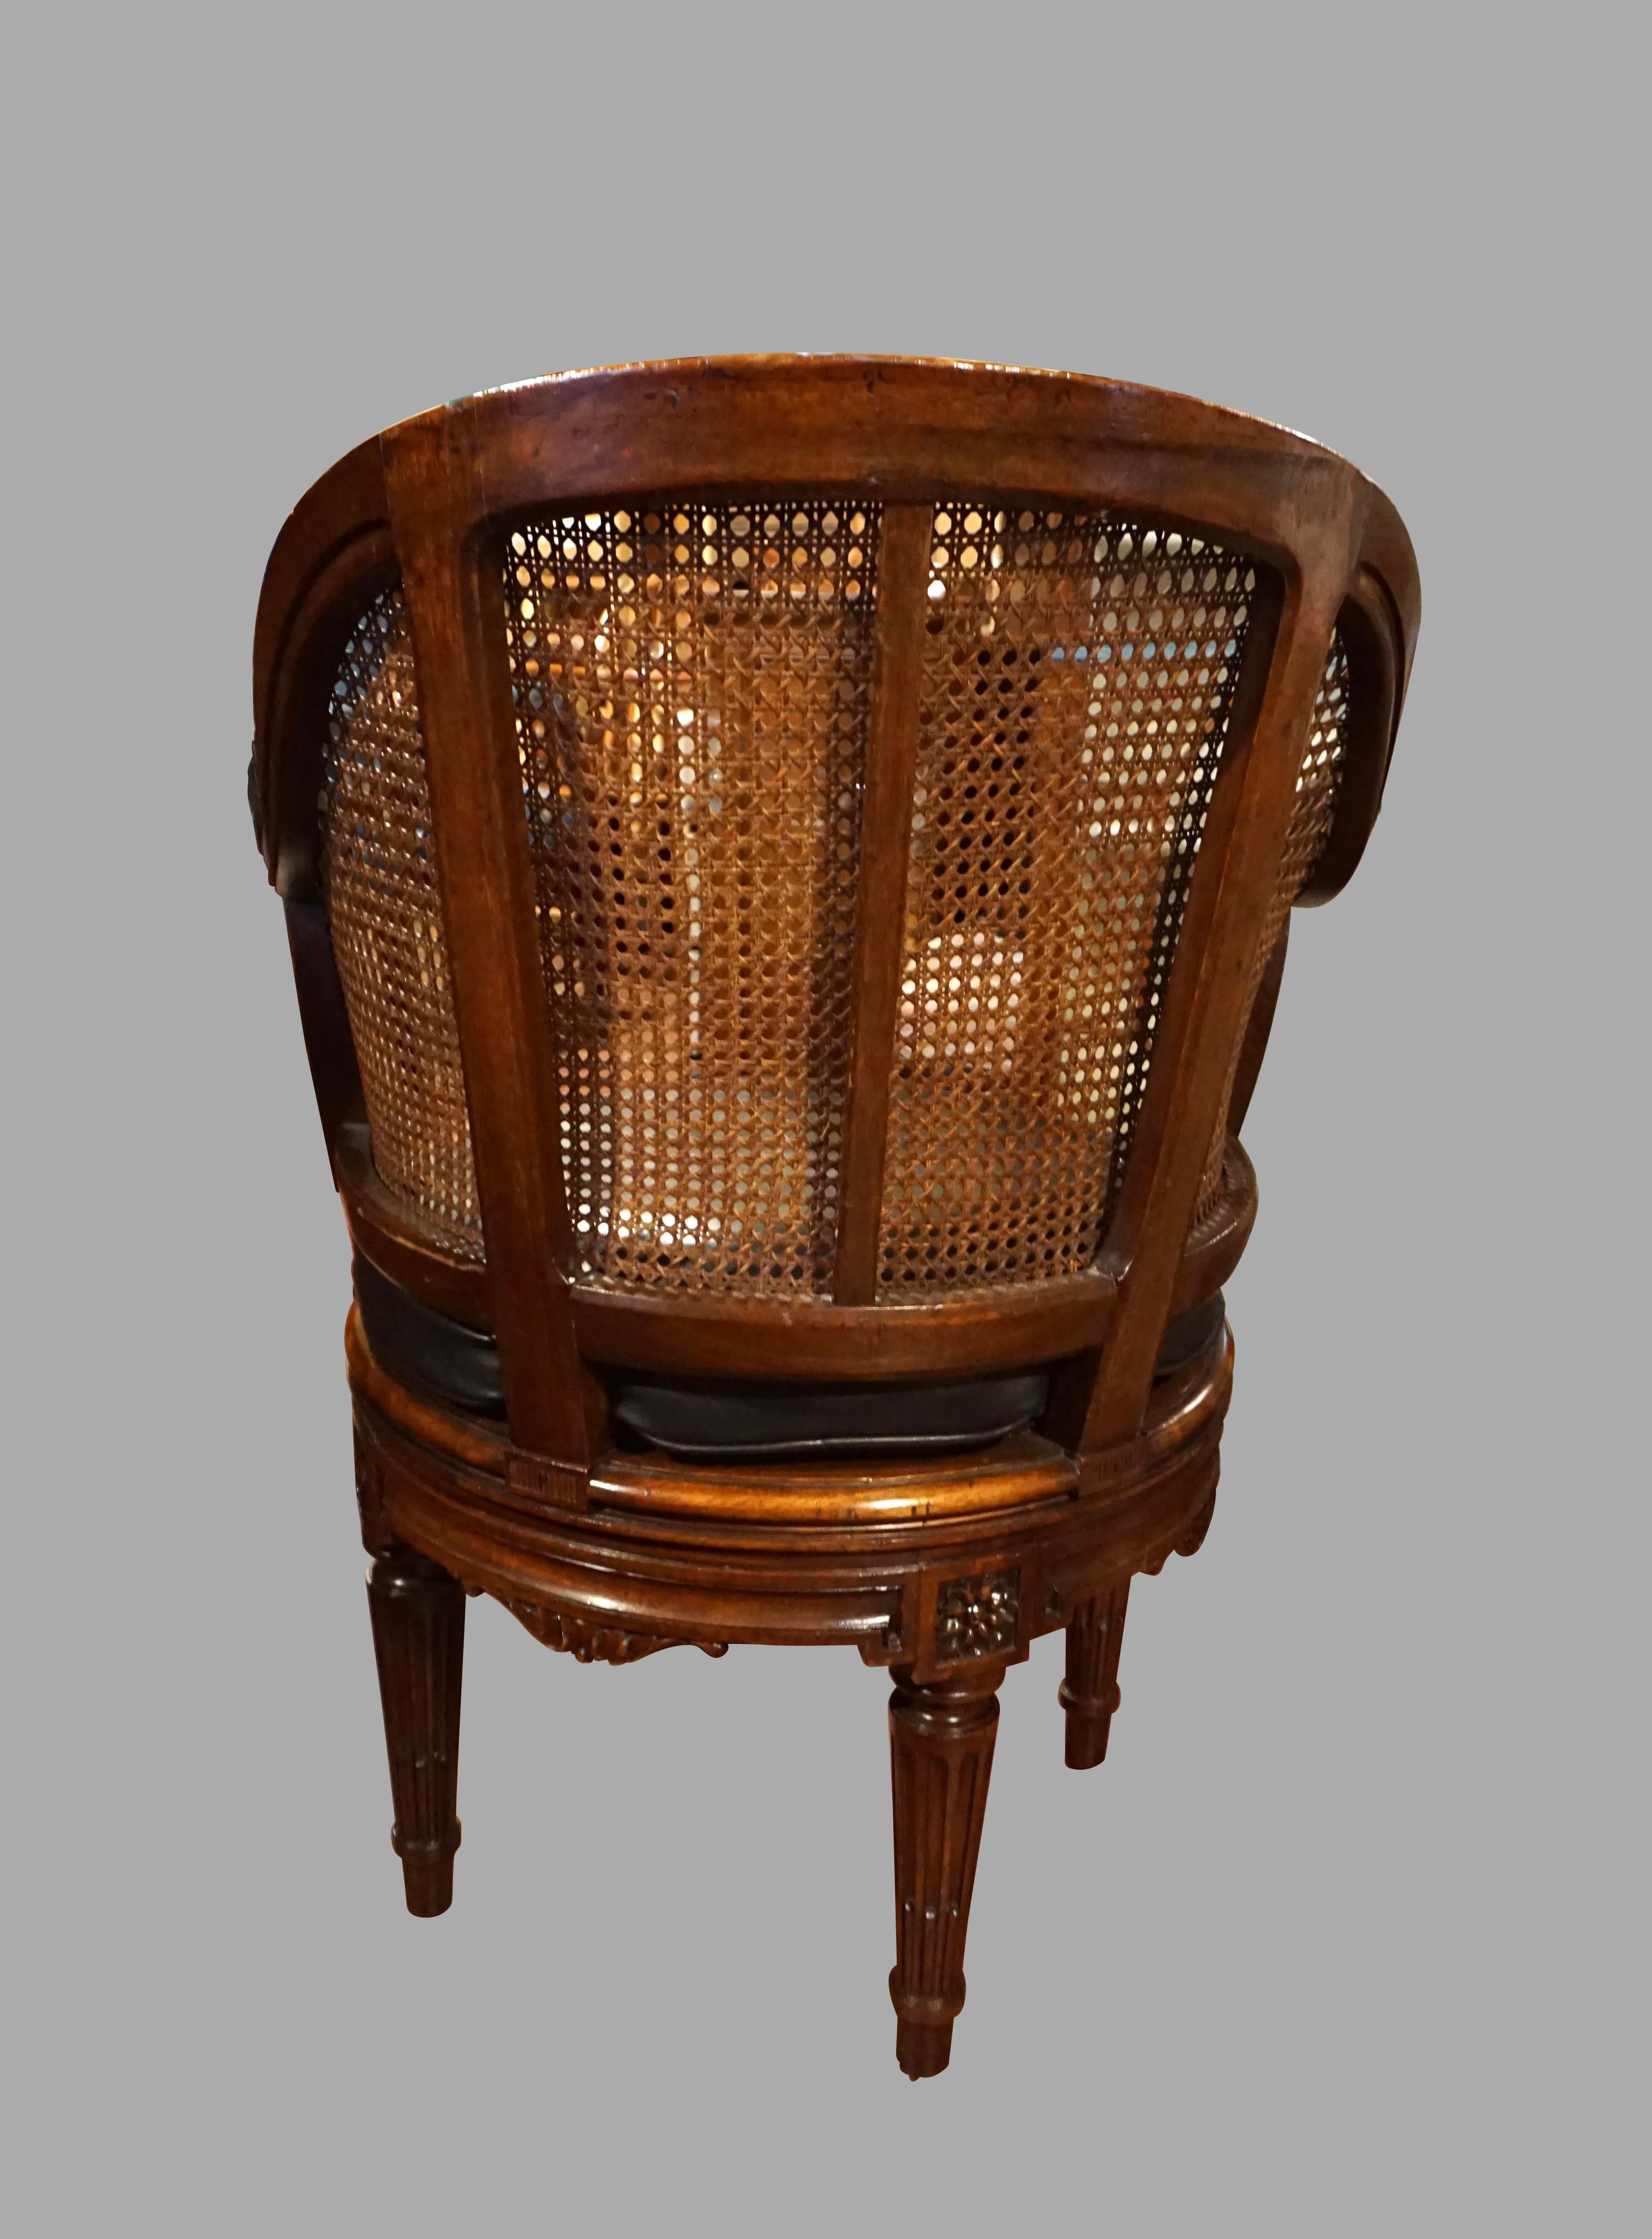 20th Century French Caned Louis XVI Style Carved Walnut Swivel Desk Chair with Leather Seat